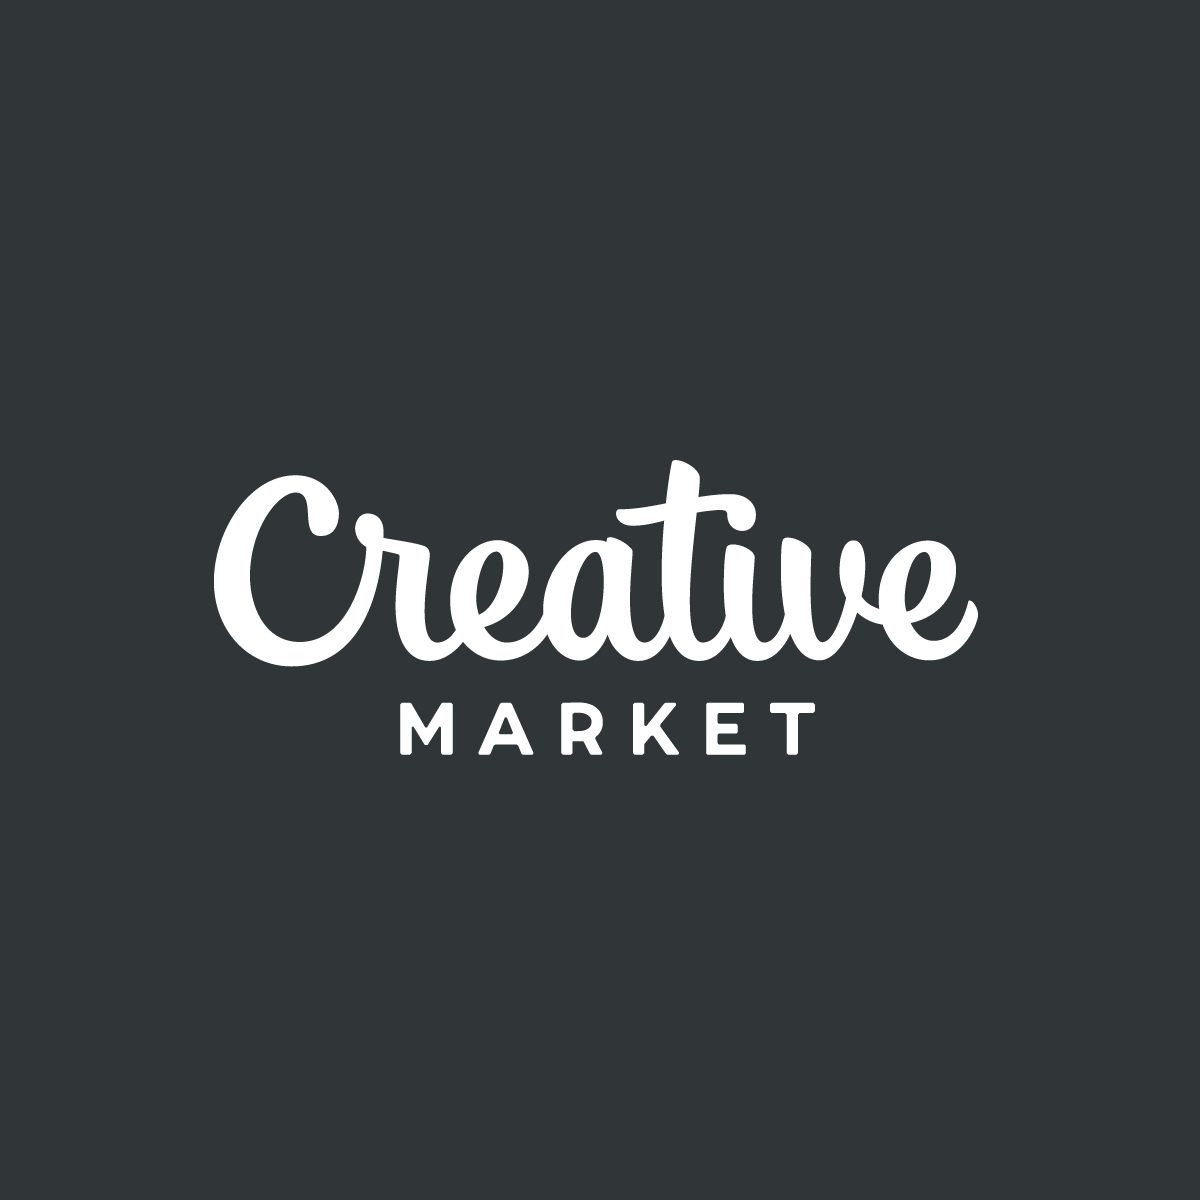 Fonts, Graphics, Themes and More | Creative Market